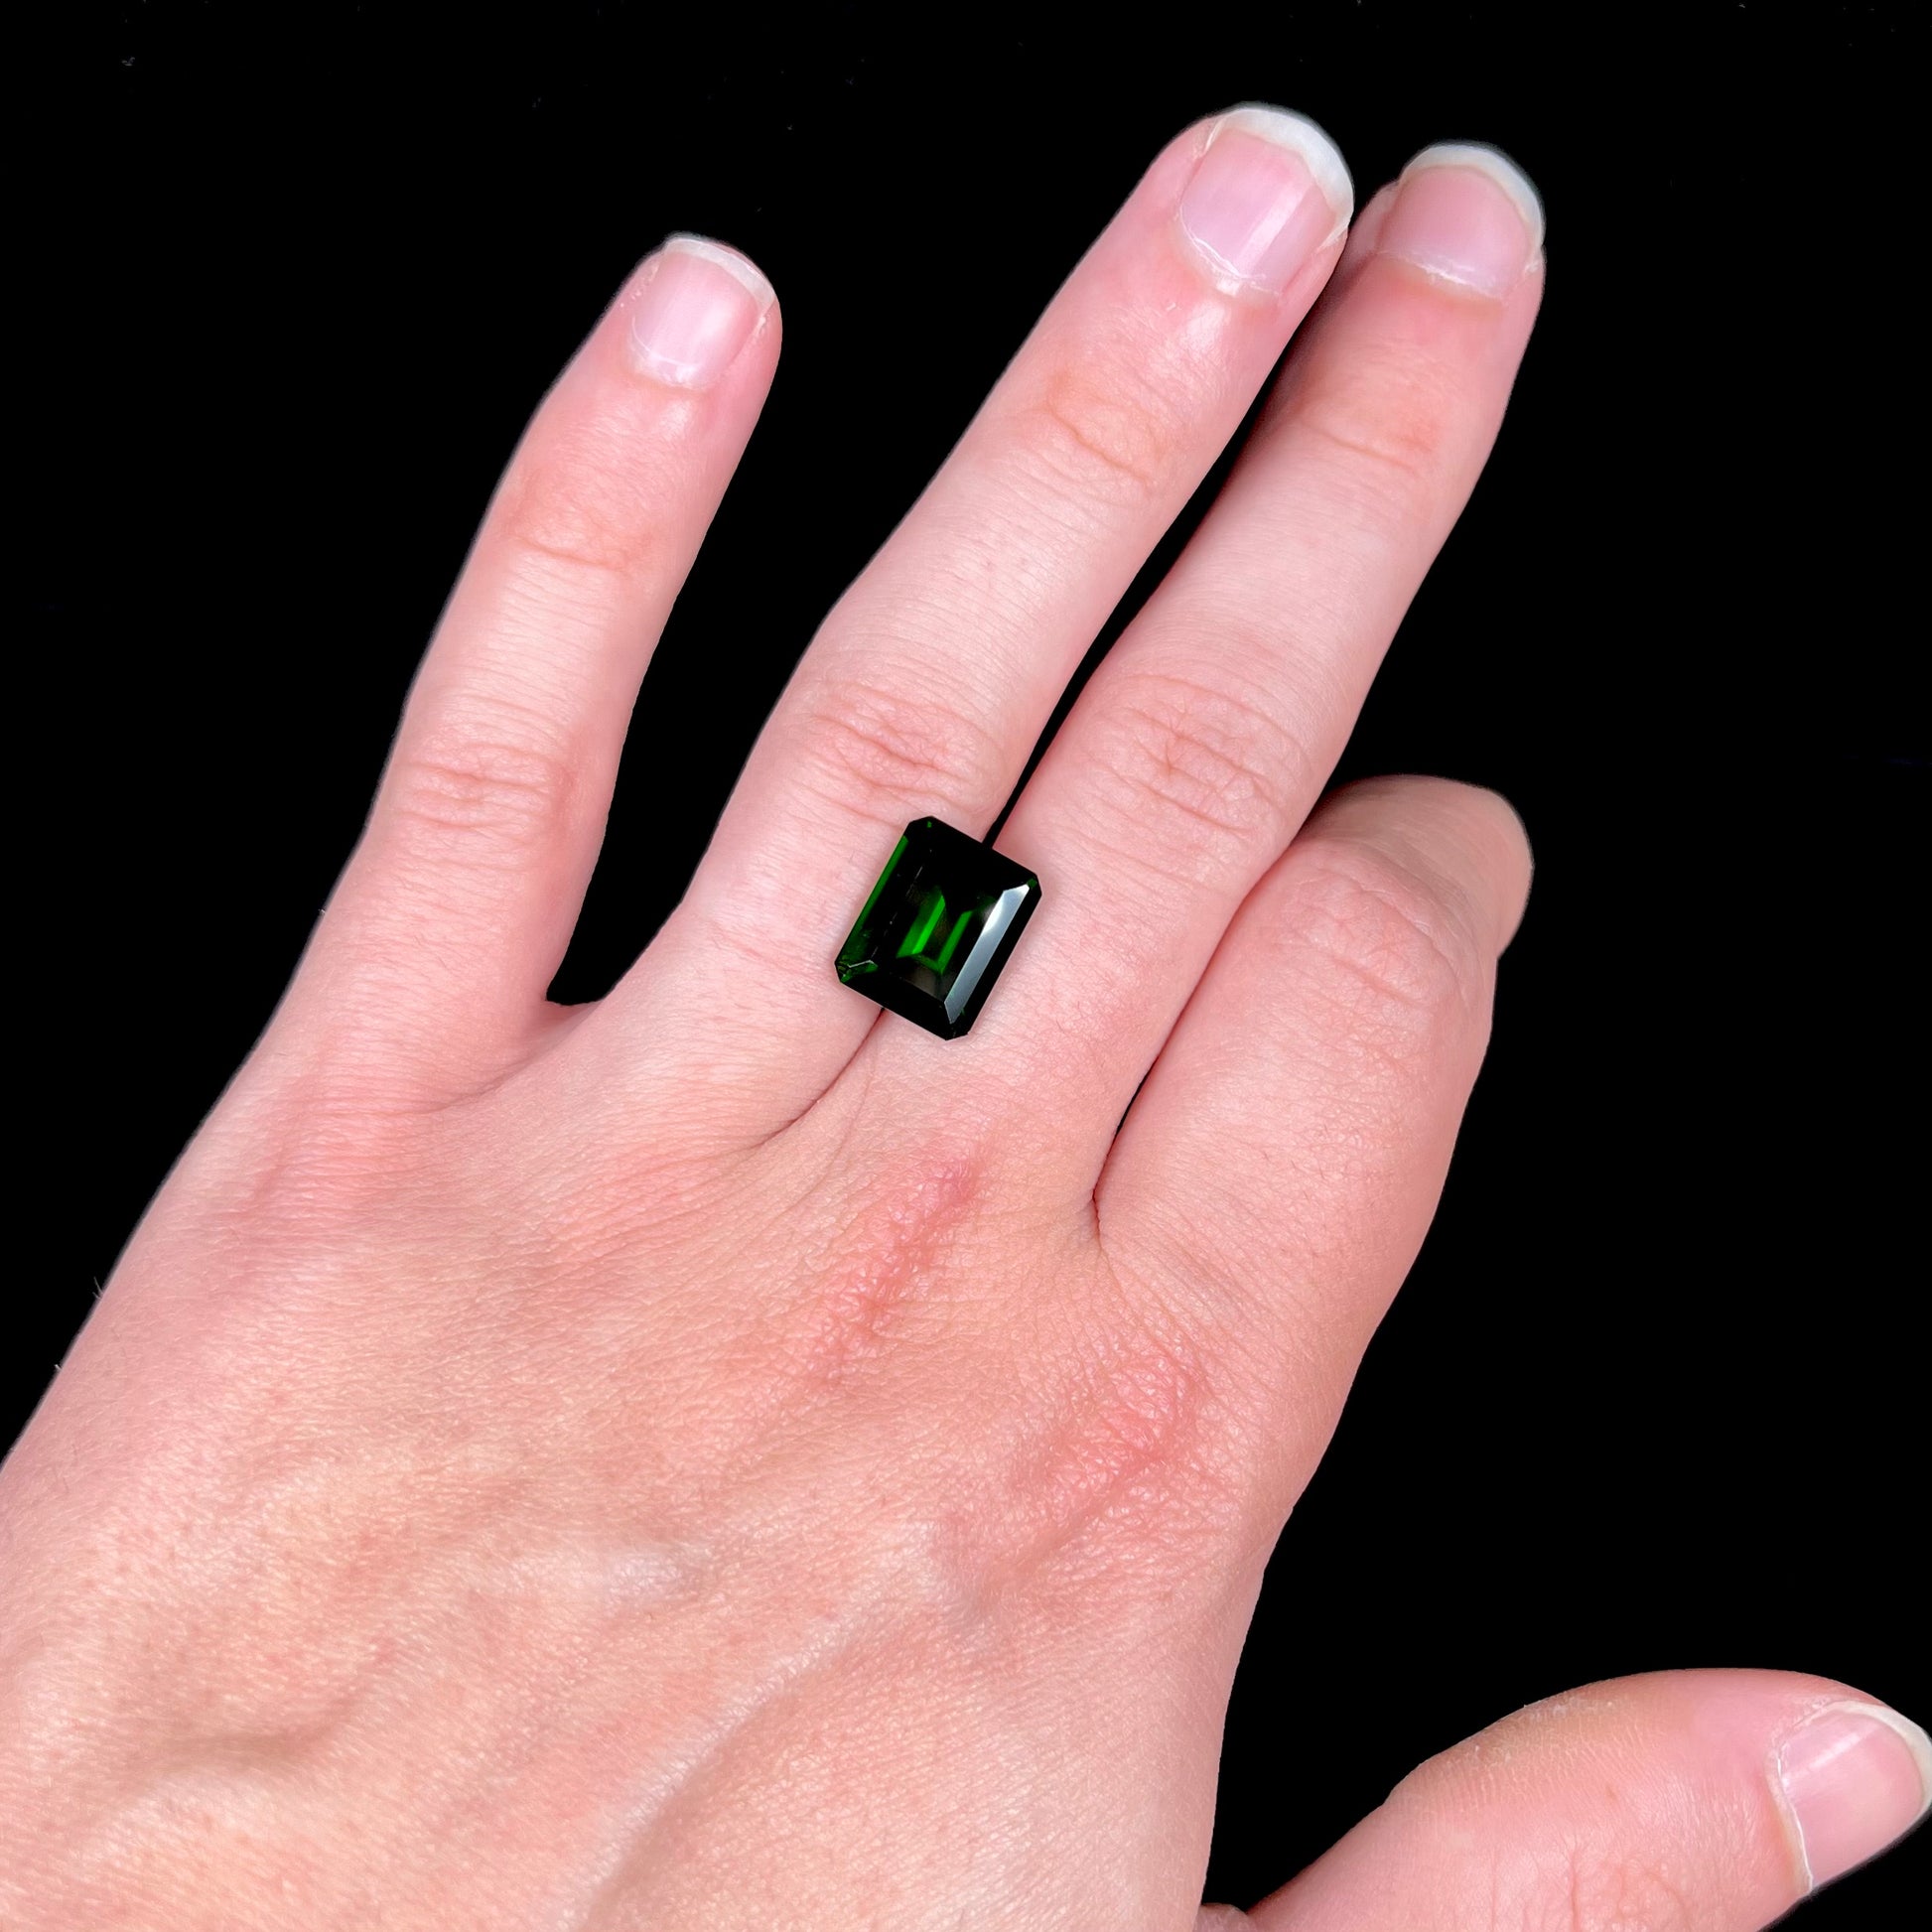 A large, emerald cut chrome diopside gemstone.  The gem is dark green color.